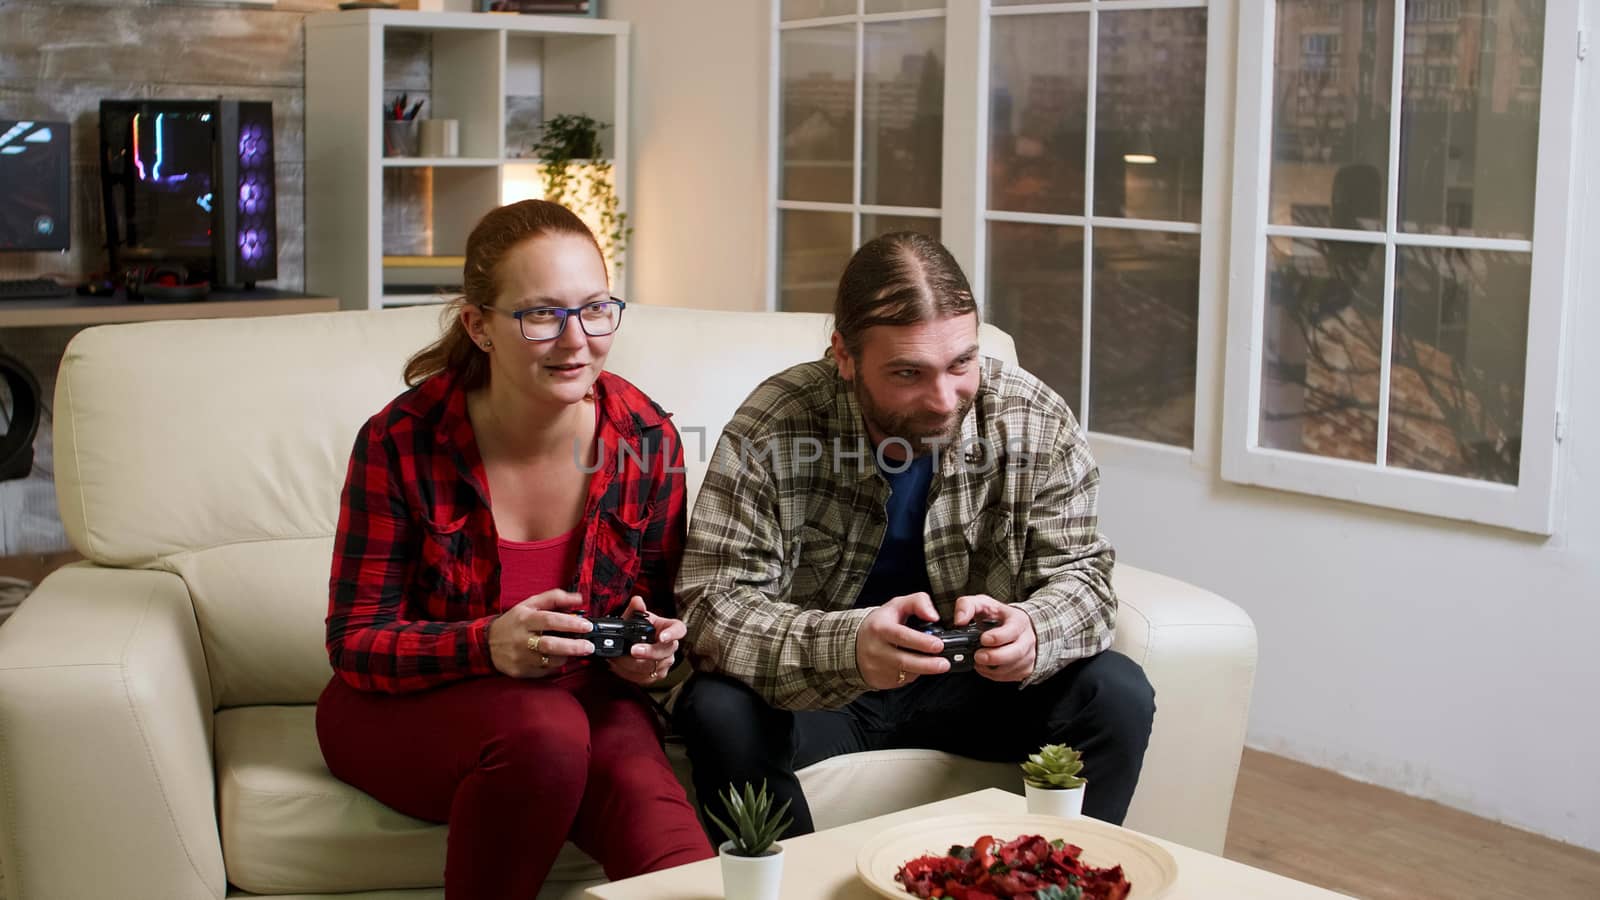 Couple in their 30's relaxing playing video games using wireless controllers. Happy relationship.